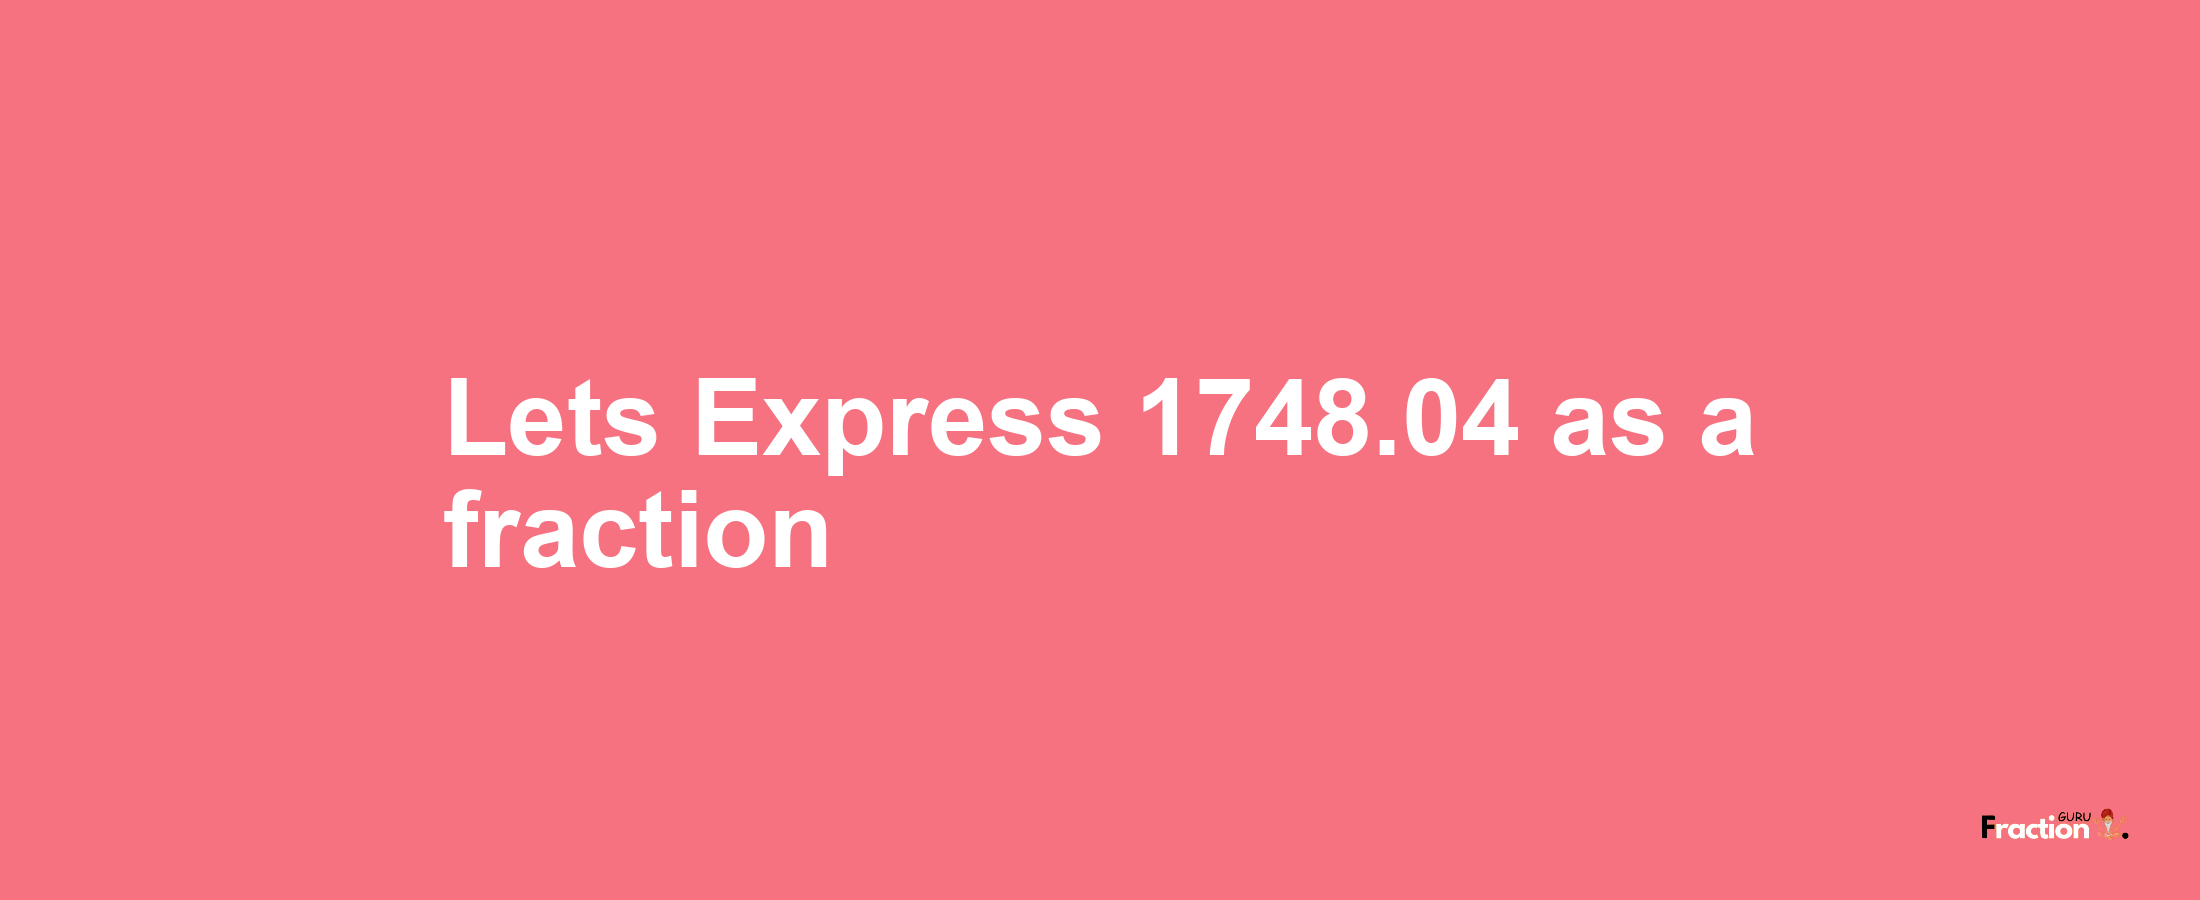 Lets Express 1748.04 as afraction